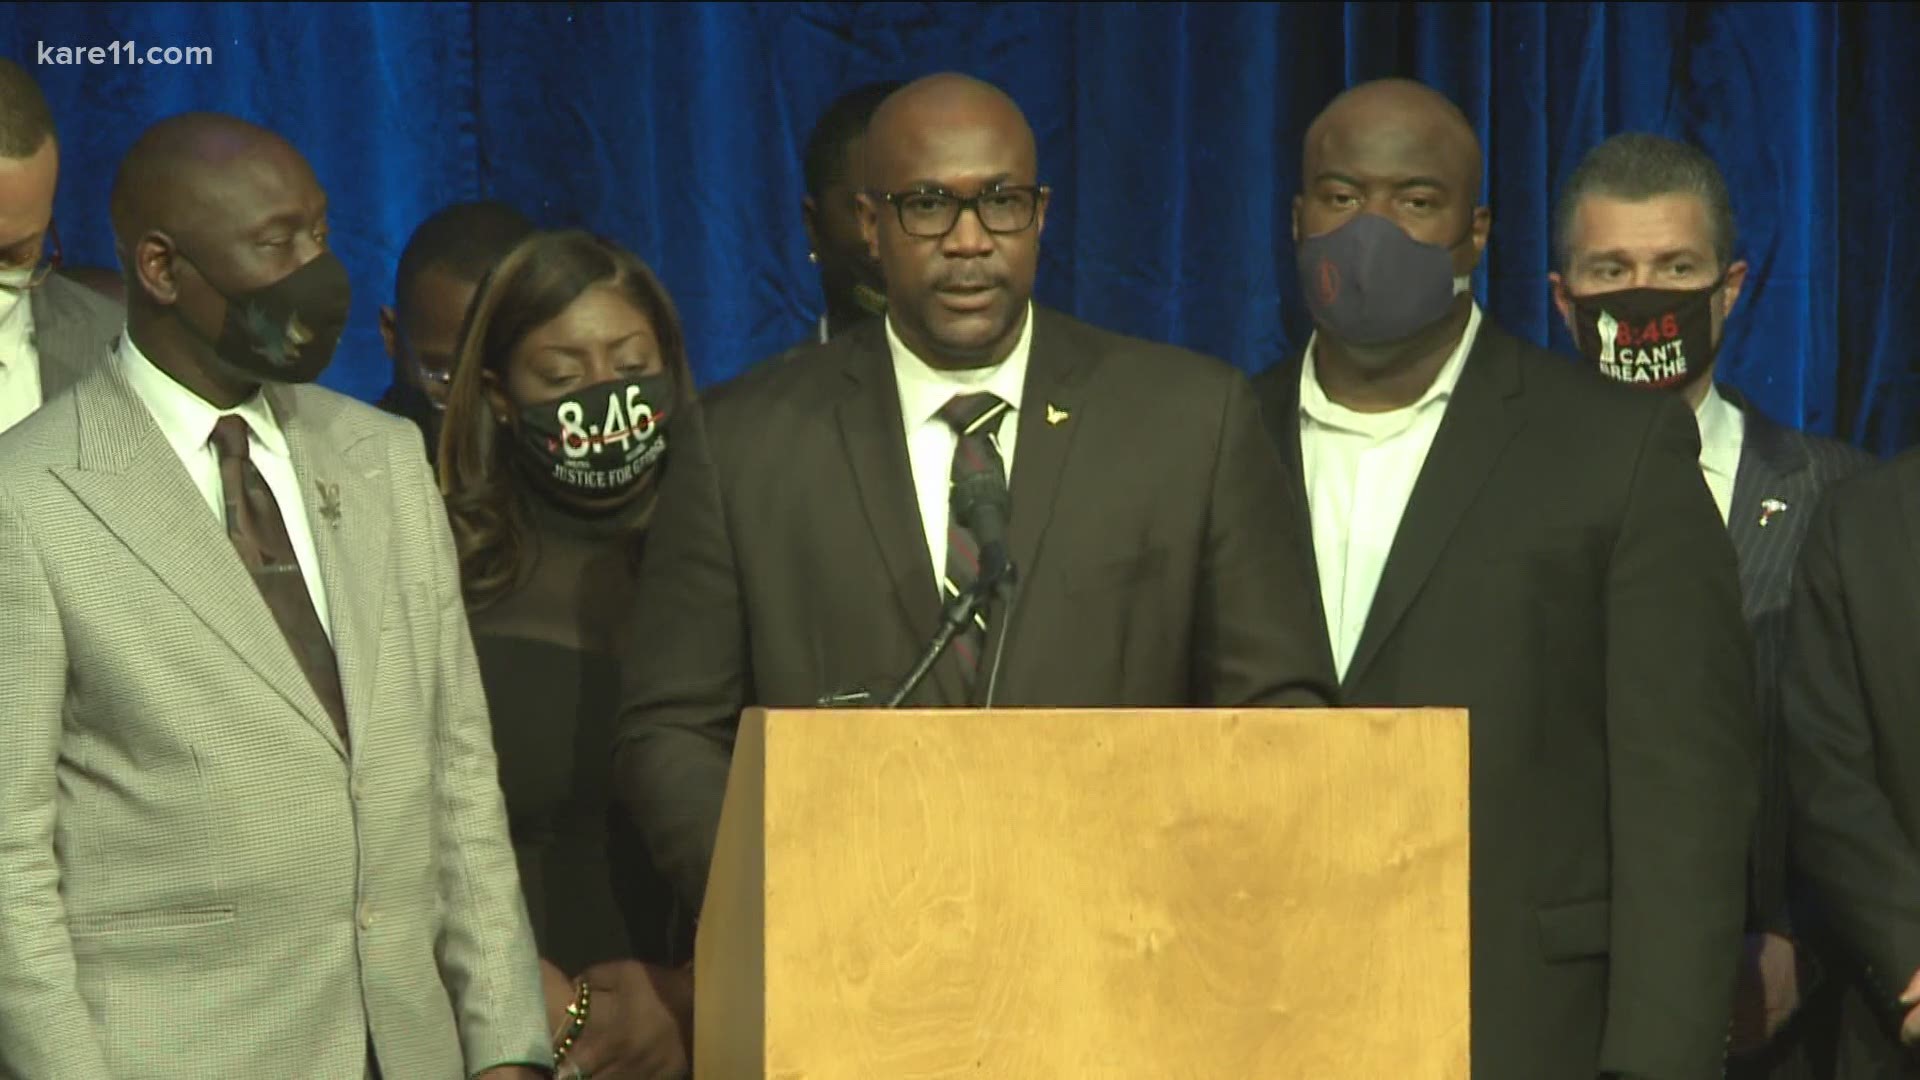 Floyd family attorney Ben Crump said the historic settlement "sends a message that the unjust taking of Black life will no longer be written off as trivial."